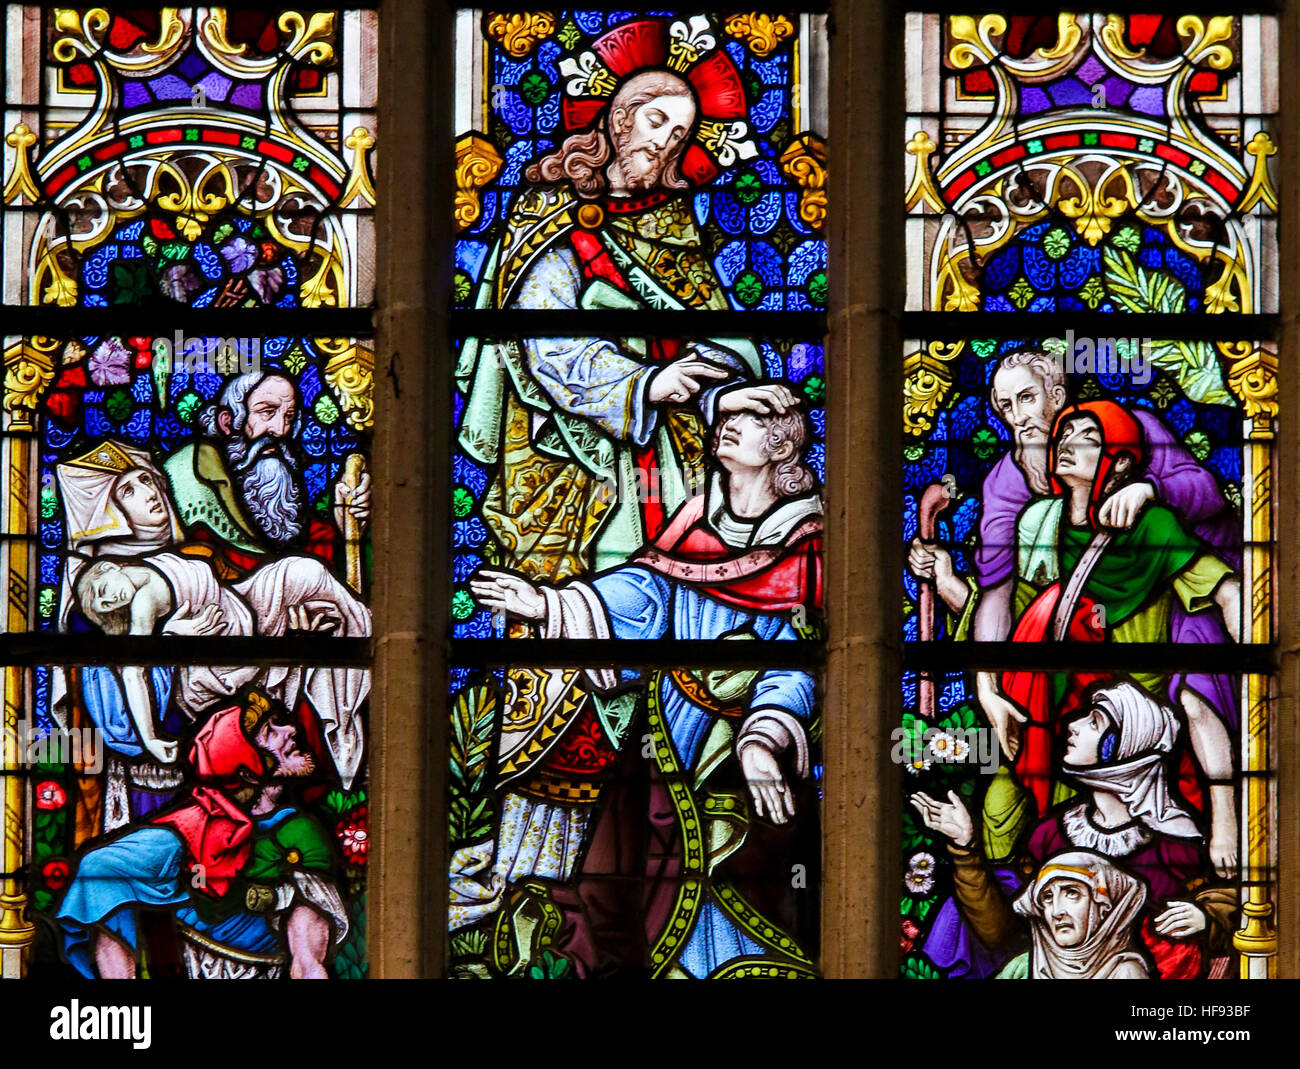 Stained Glass window depicting Healings by Jesus Christ in the Cathedral of Saint Bavo in Ghent, Flanders, Belgium. Stock Photo